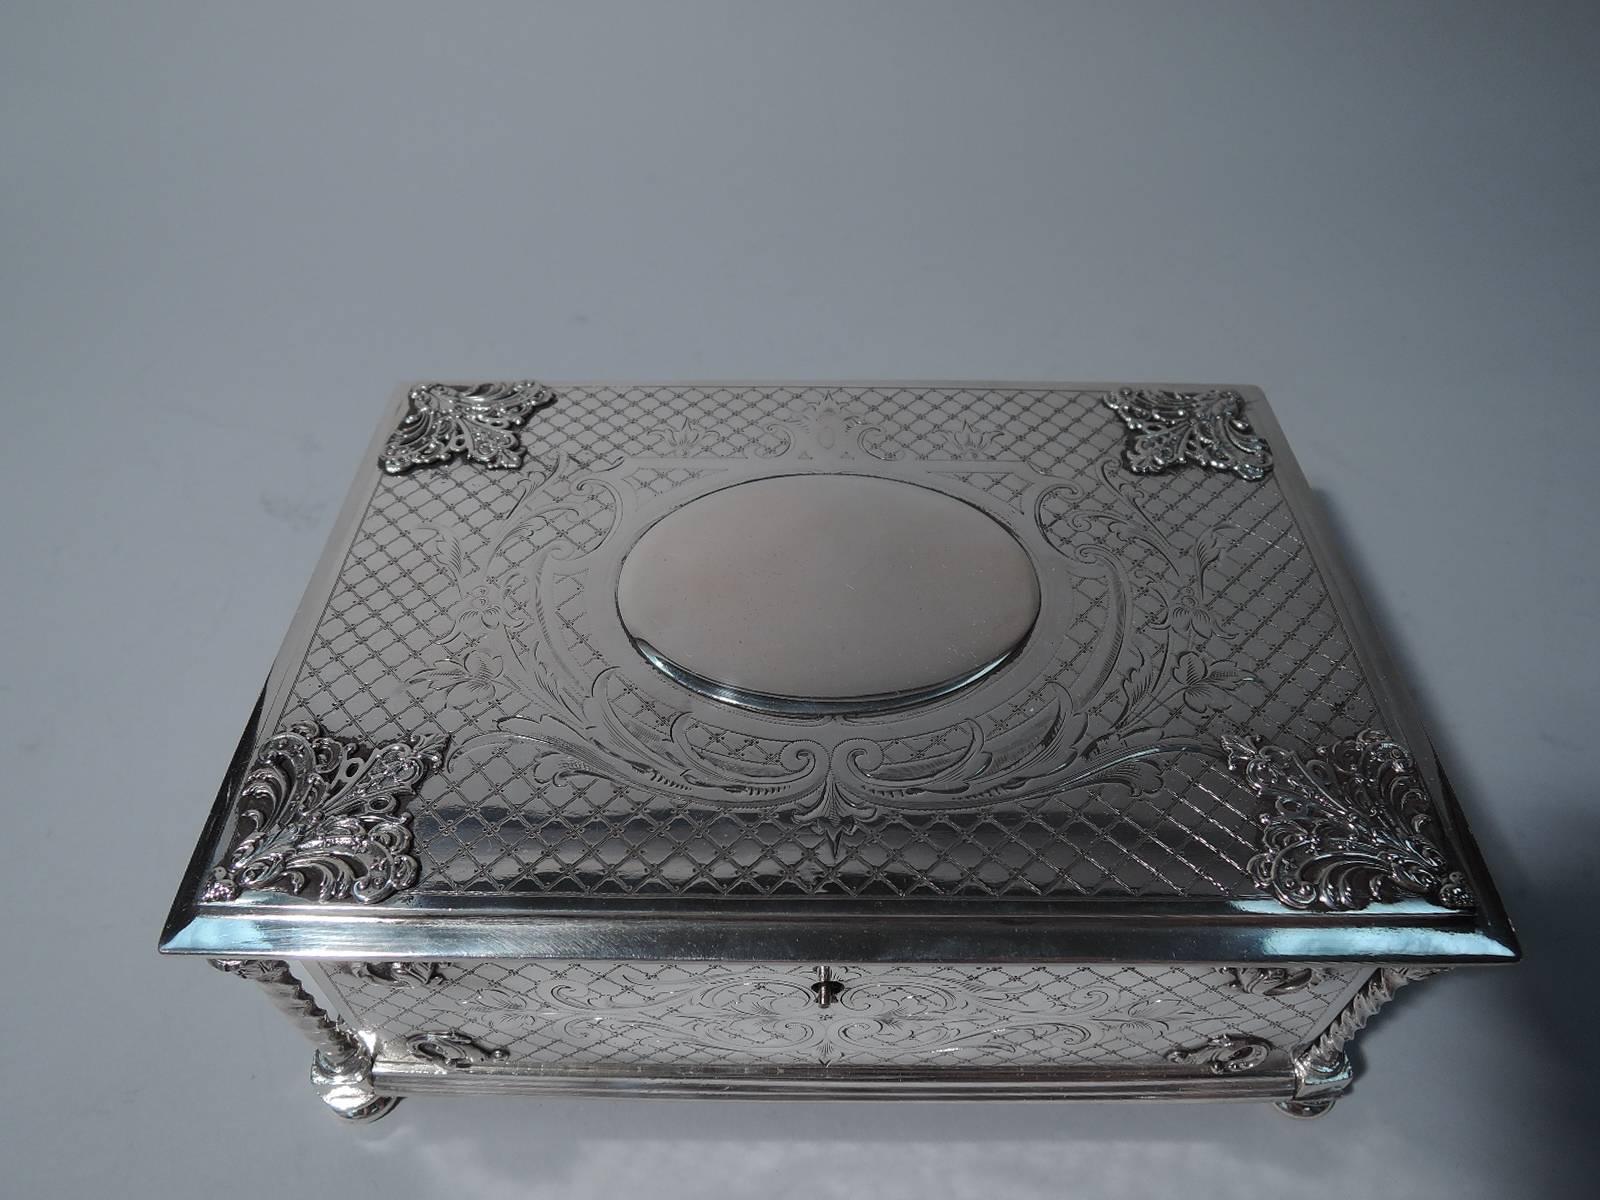 Austrian 800 silver box, circa 1880. Rectangular. Flat hinged cover, twisted corner columns with foliate capitals and applied foliage and scrolls. Engraved scrolls and foliage on diaper ground. Cover has applied oval cartouche (vacant). Rests on